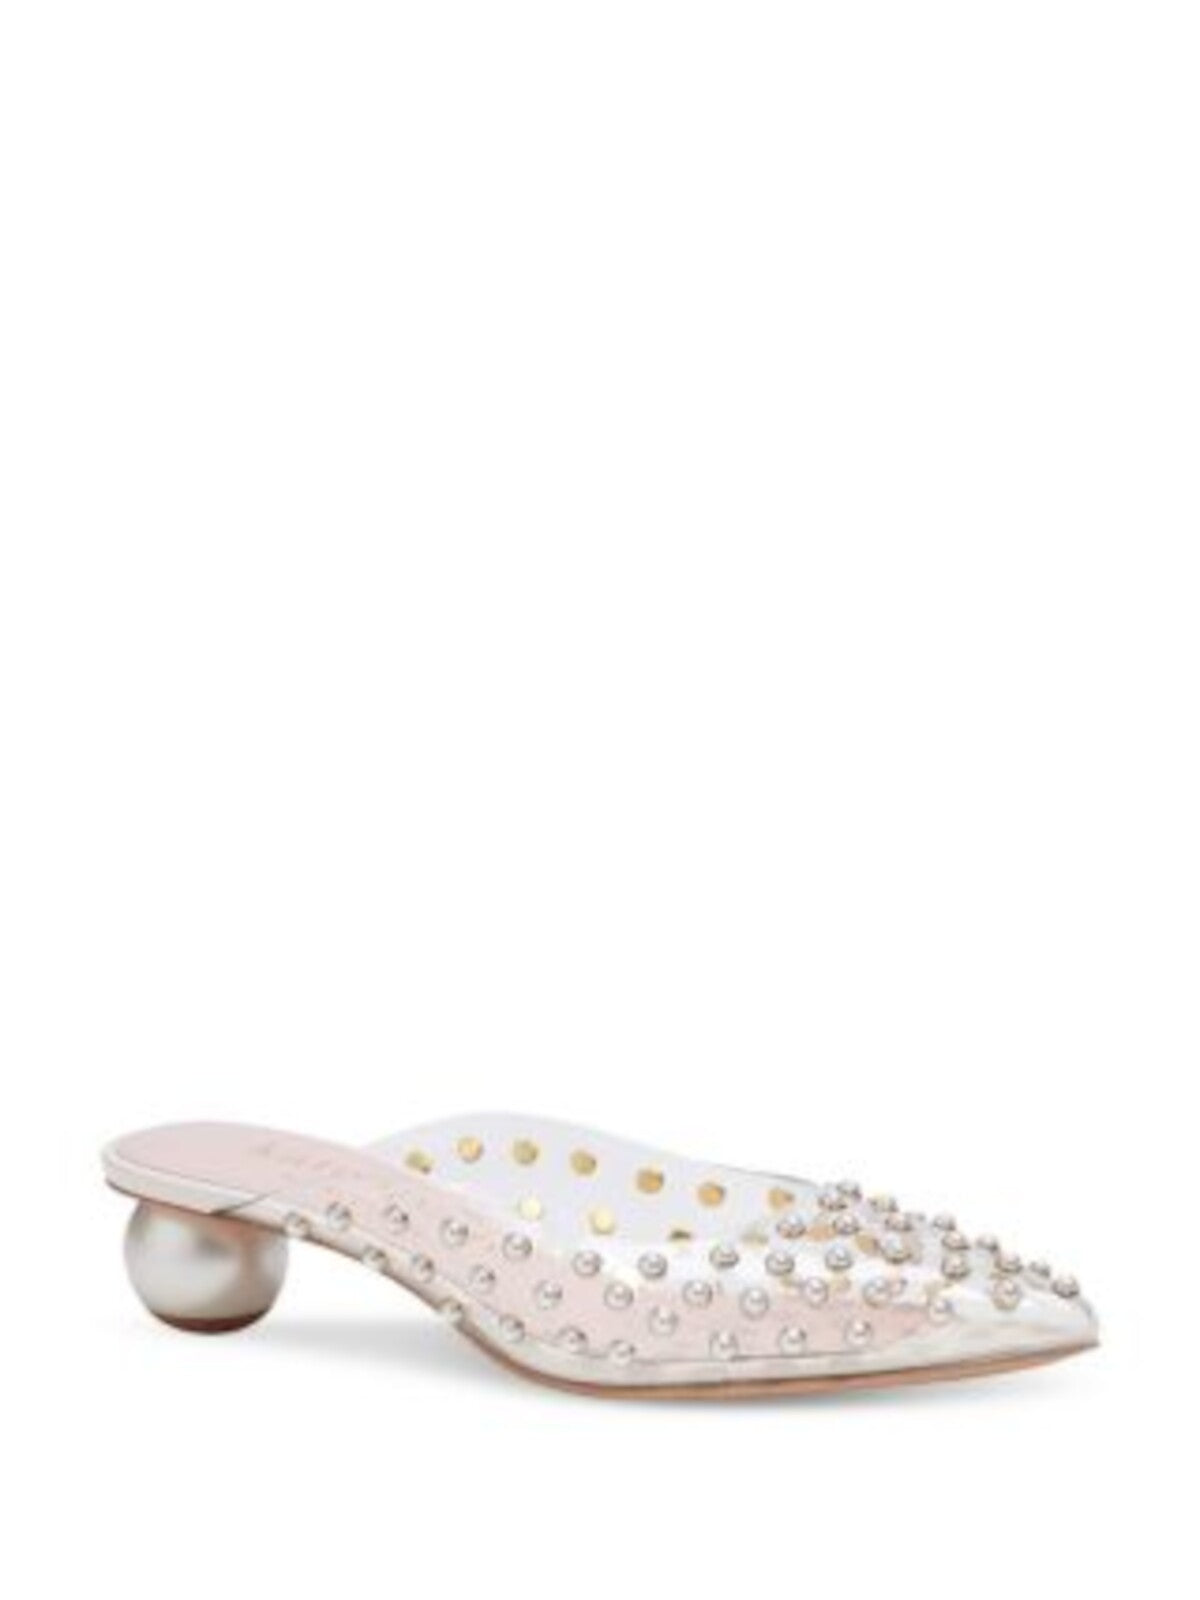 KATE SPADE NEW YORK Womens Clear Embellished Padded Honor Pointed Toe Slip On Flats Shoes 7.5 B